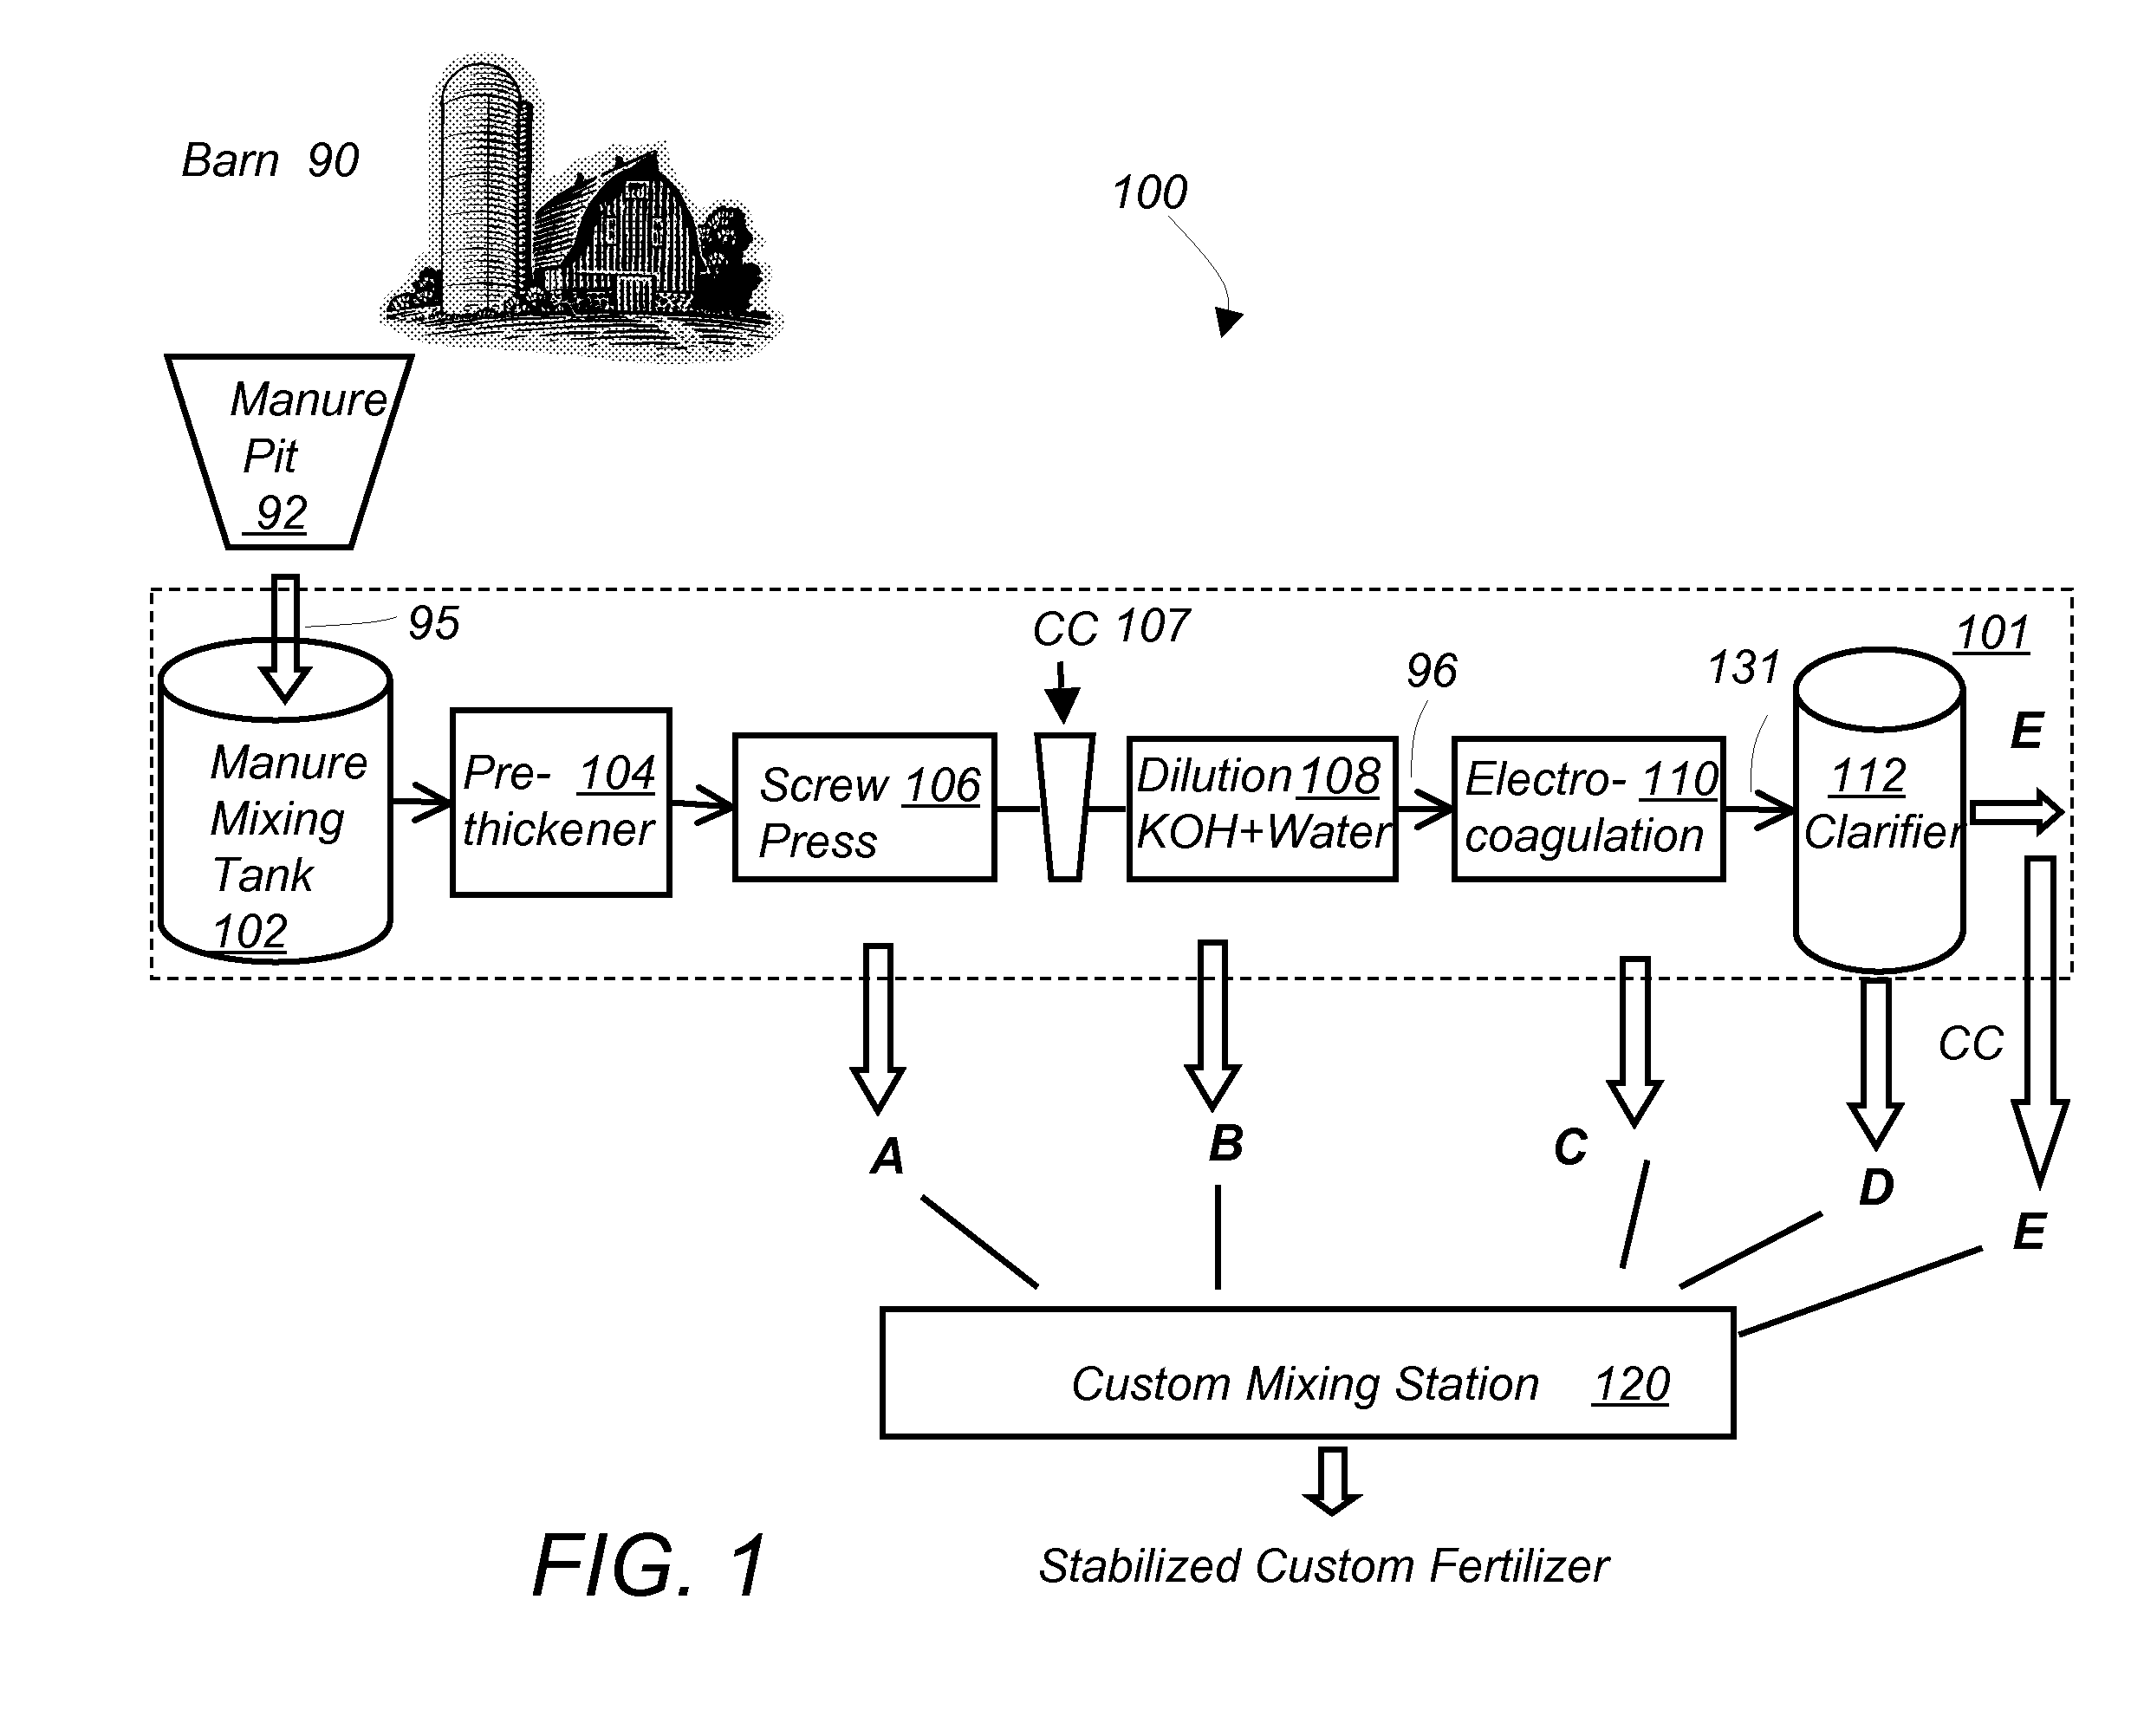 Optimized apparatus and method for manure management